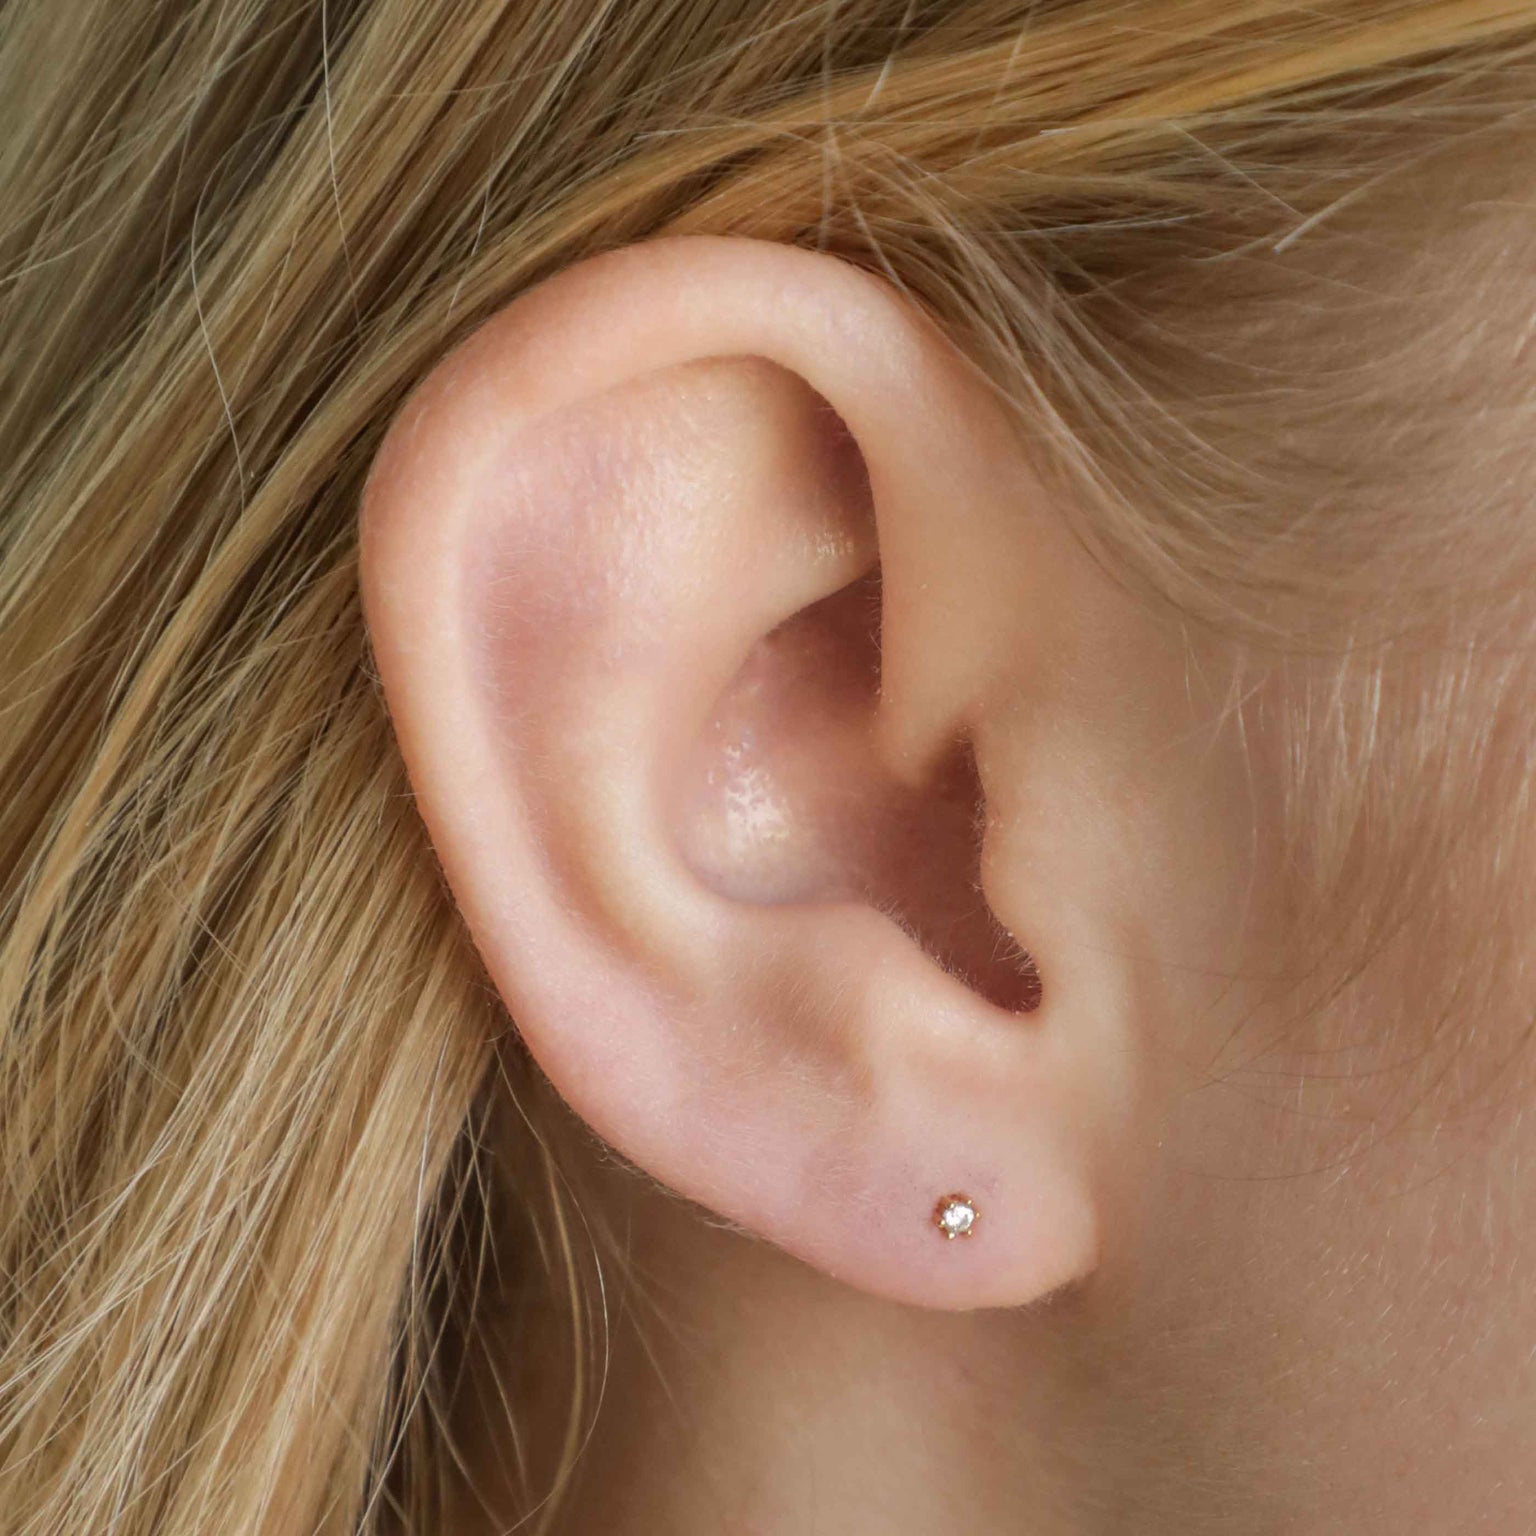 Flora Tiny Barbell in Gold worn in lobe